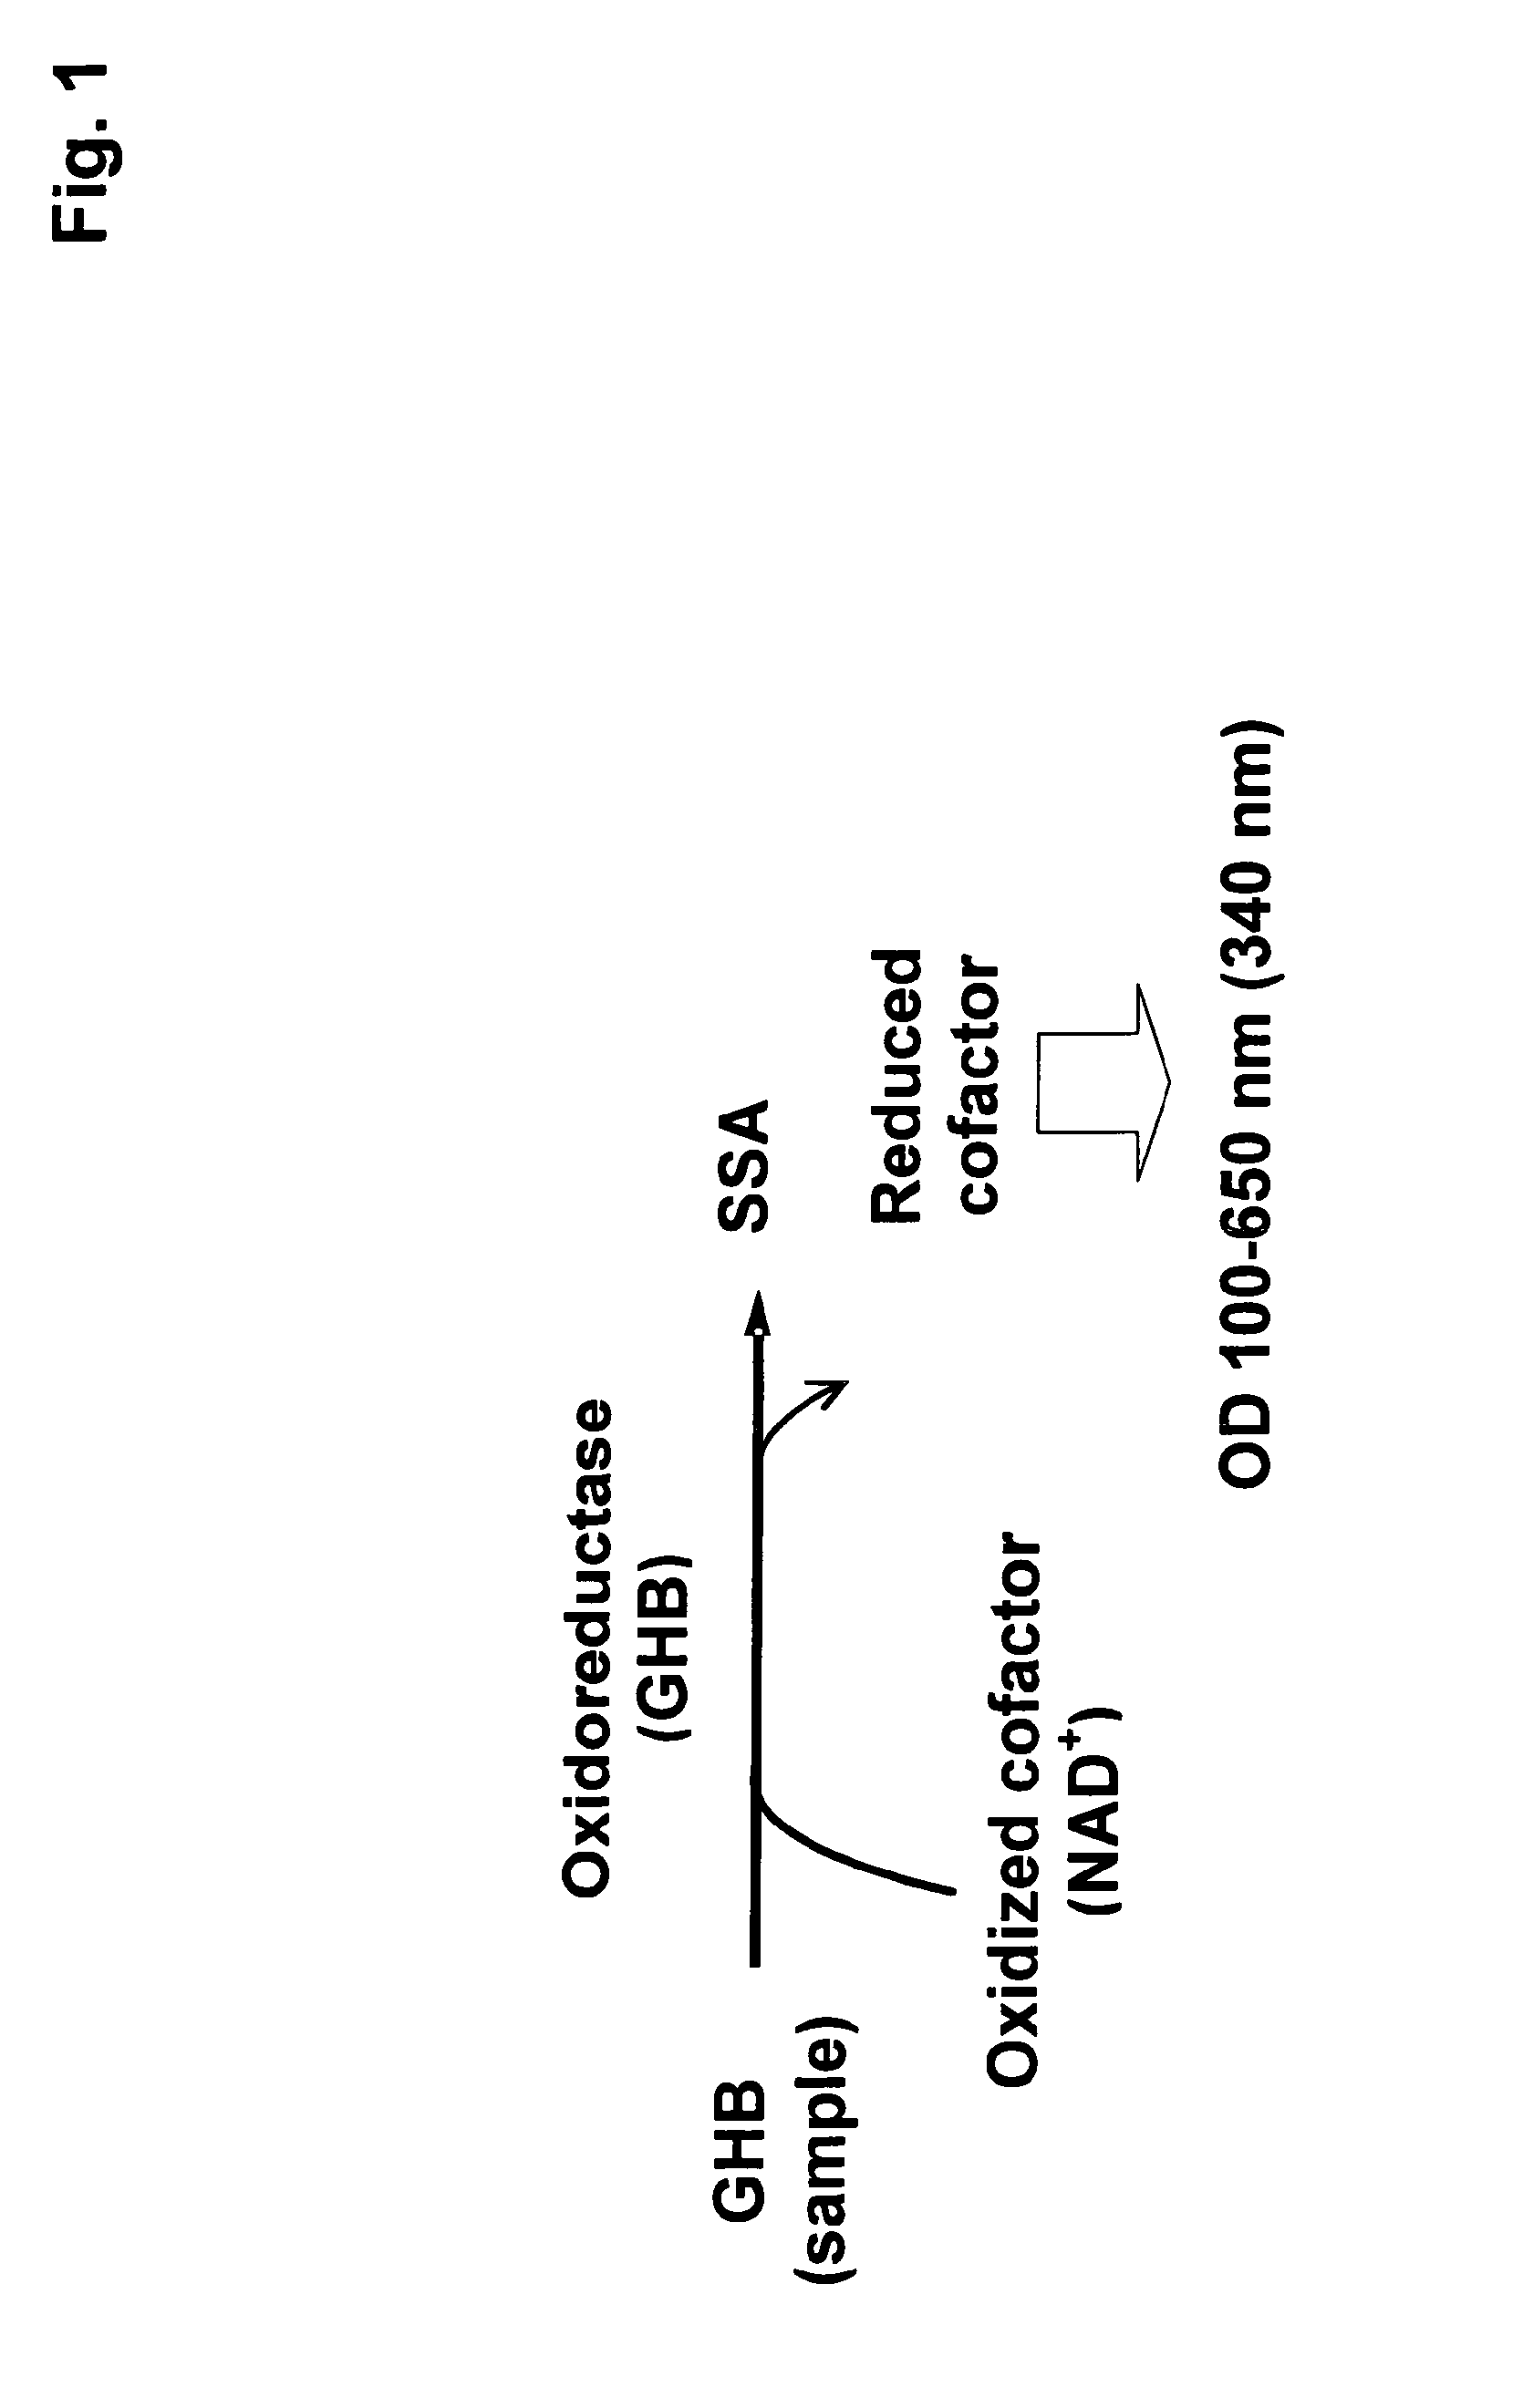 Methods for determining the concentration of gamma-hydroxy butyric acid (GHB) in a sample